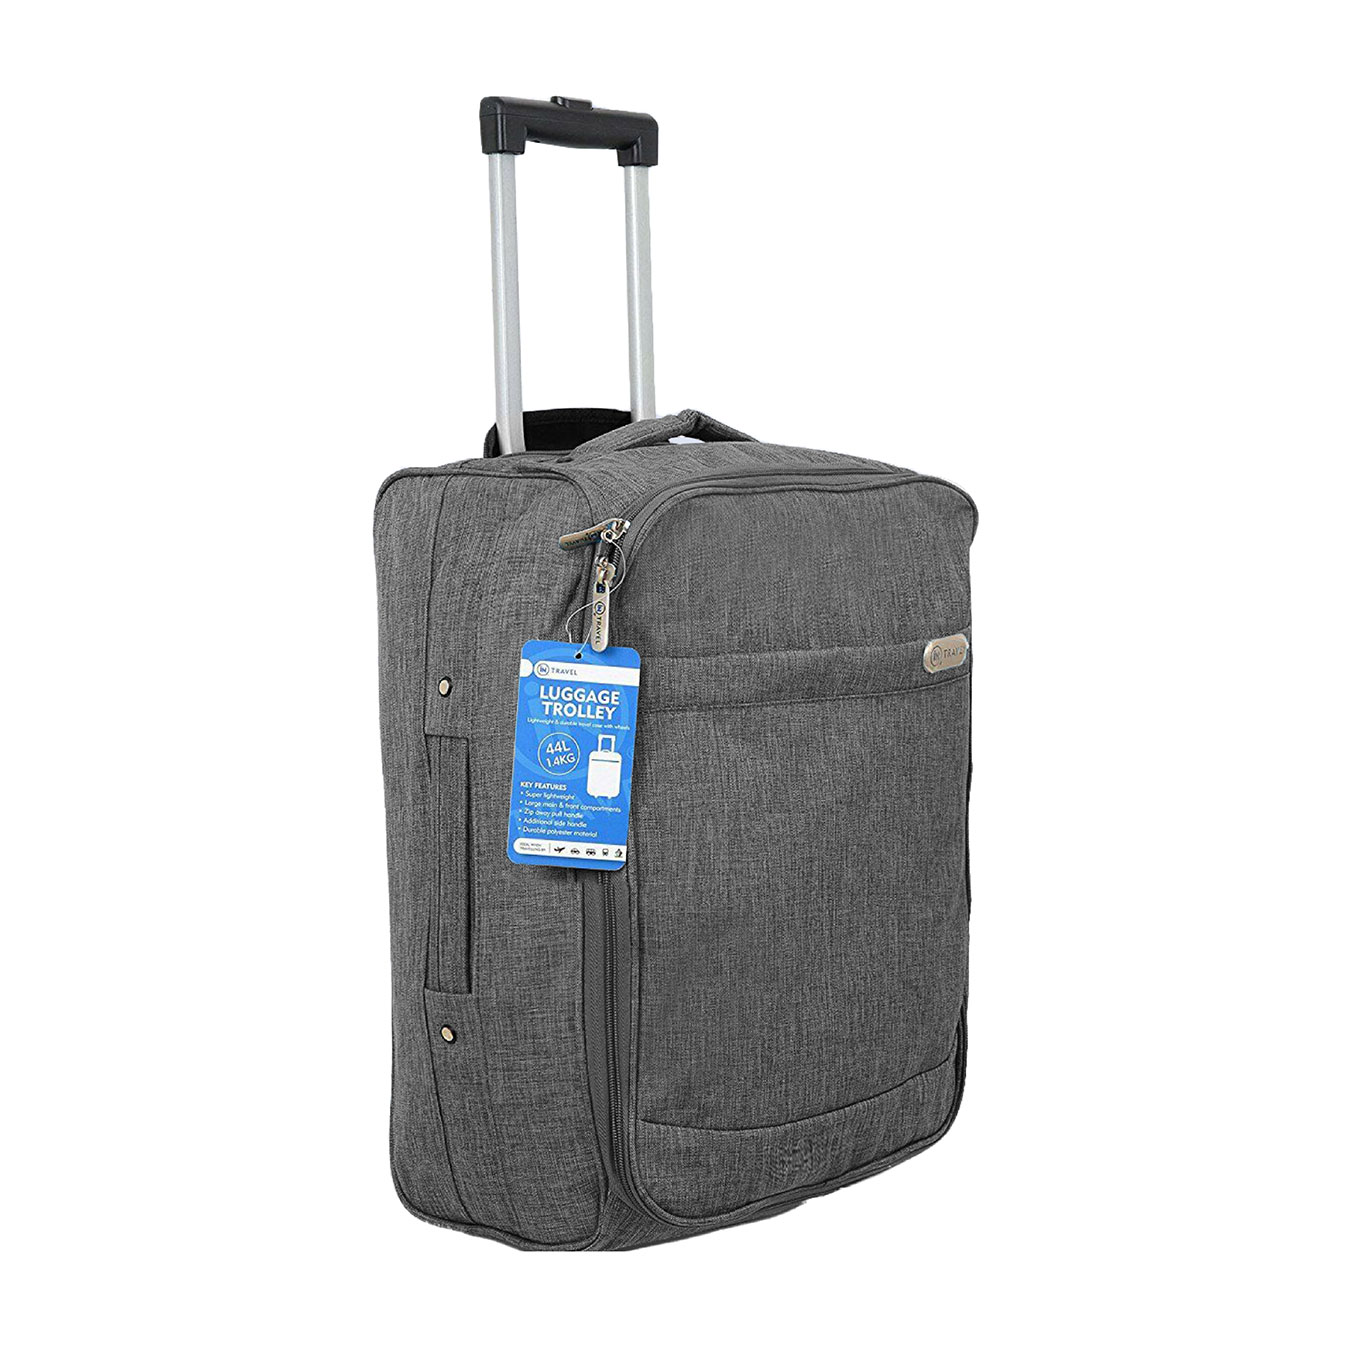 An image of iN Travel Hand Luggage - 44L Flight Bag (Grey)